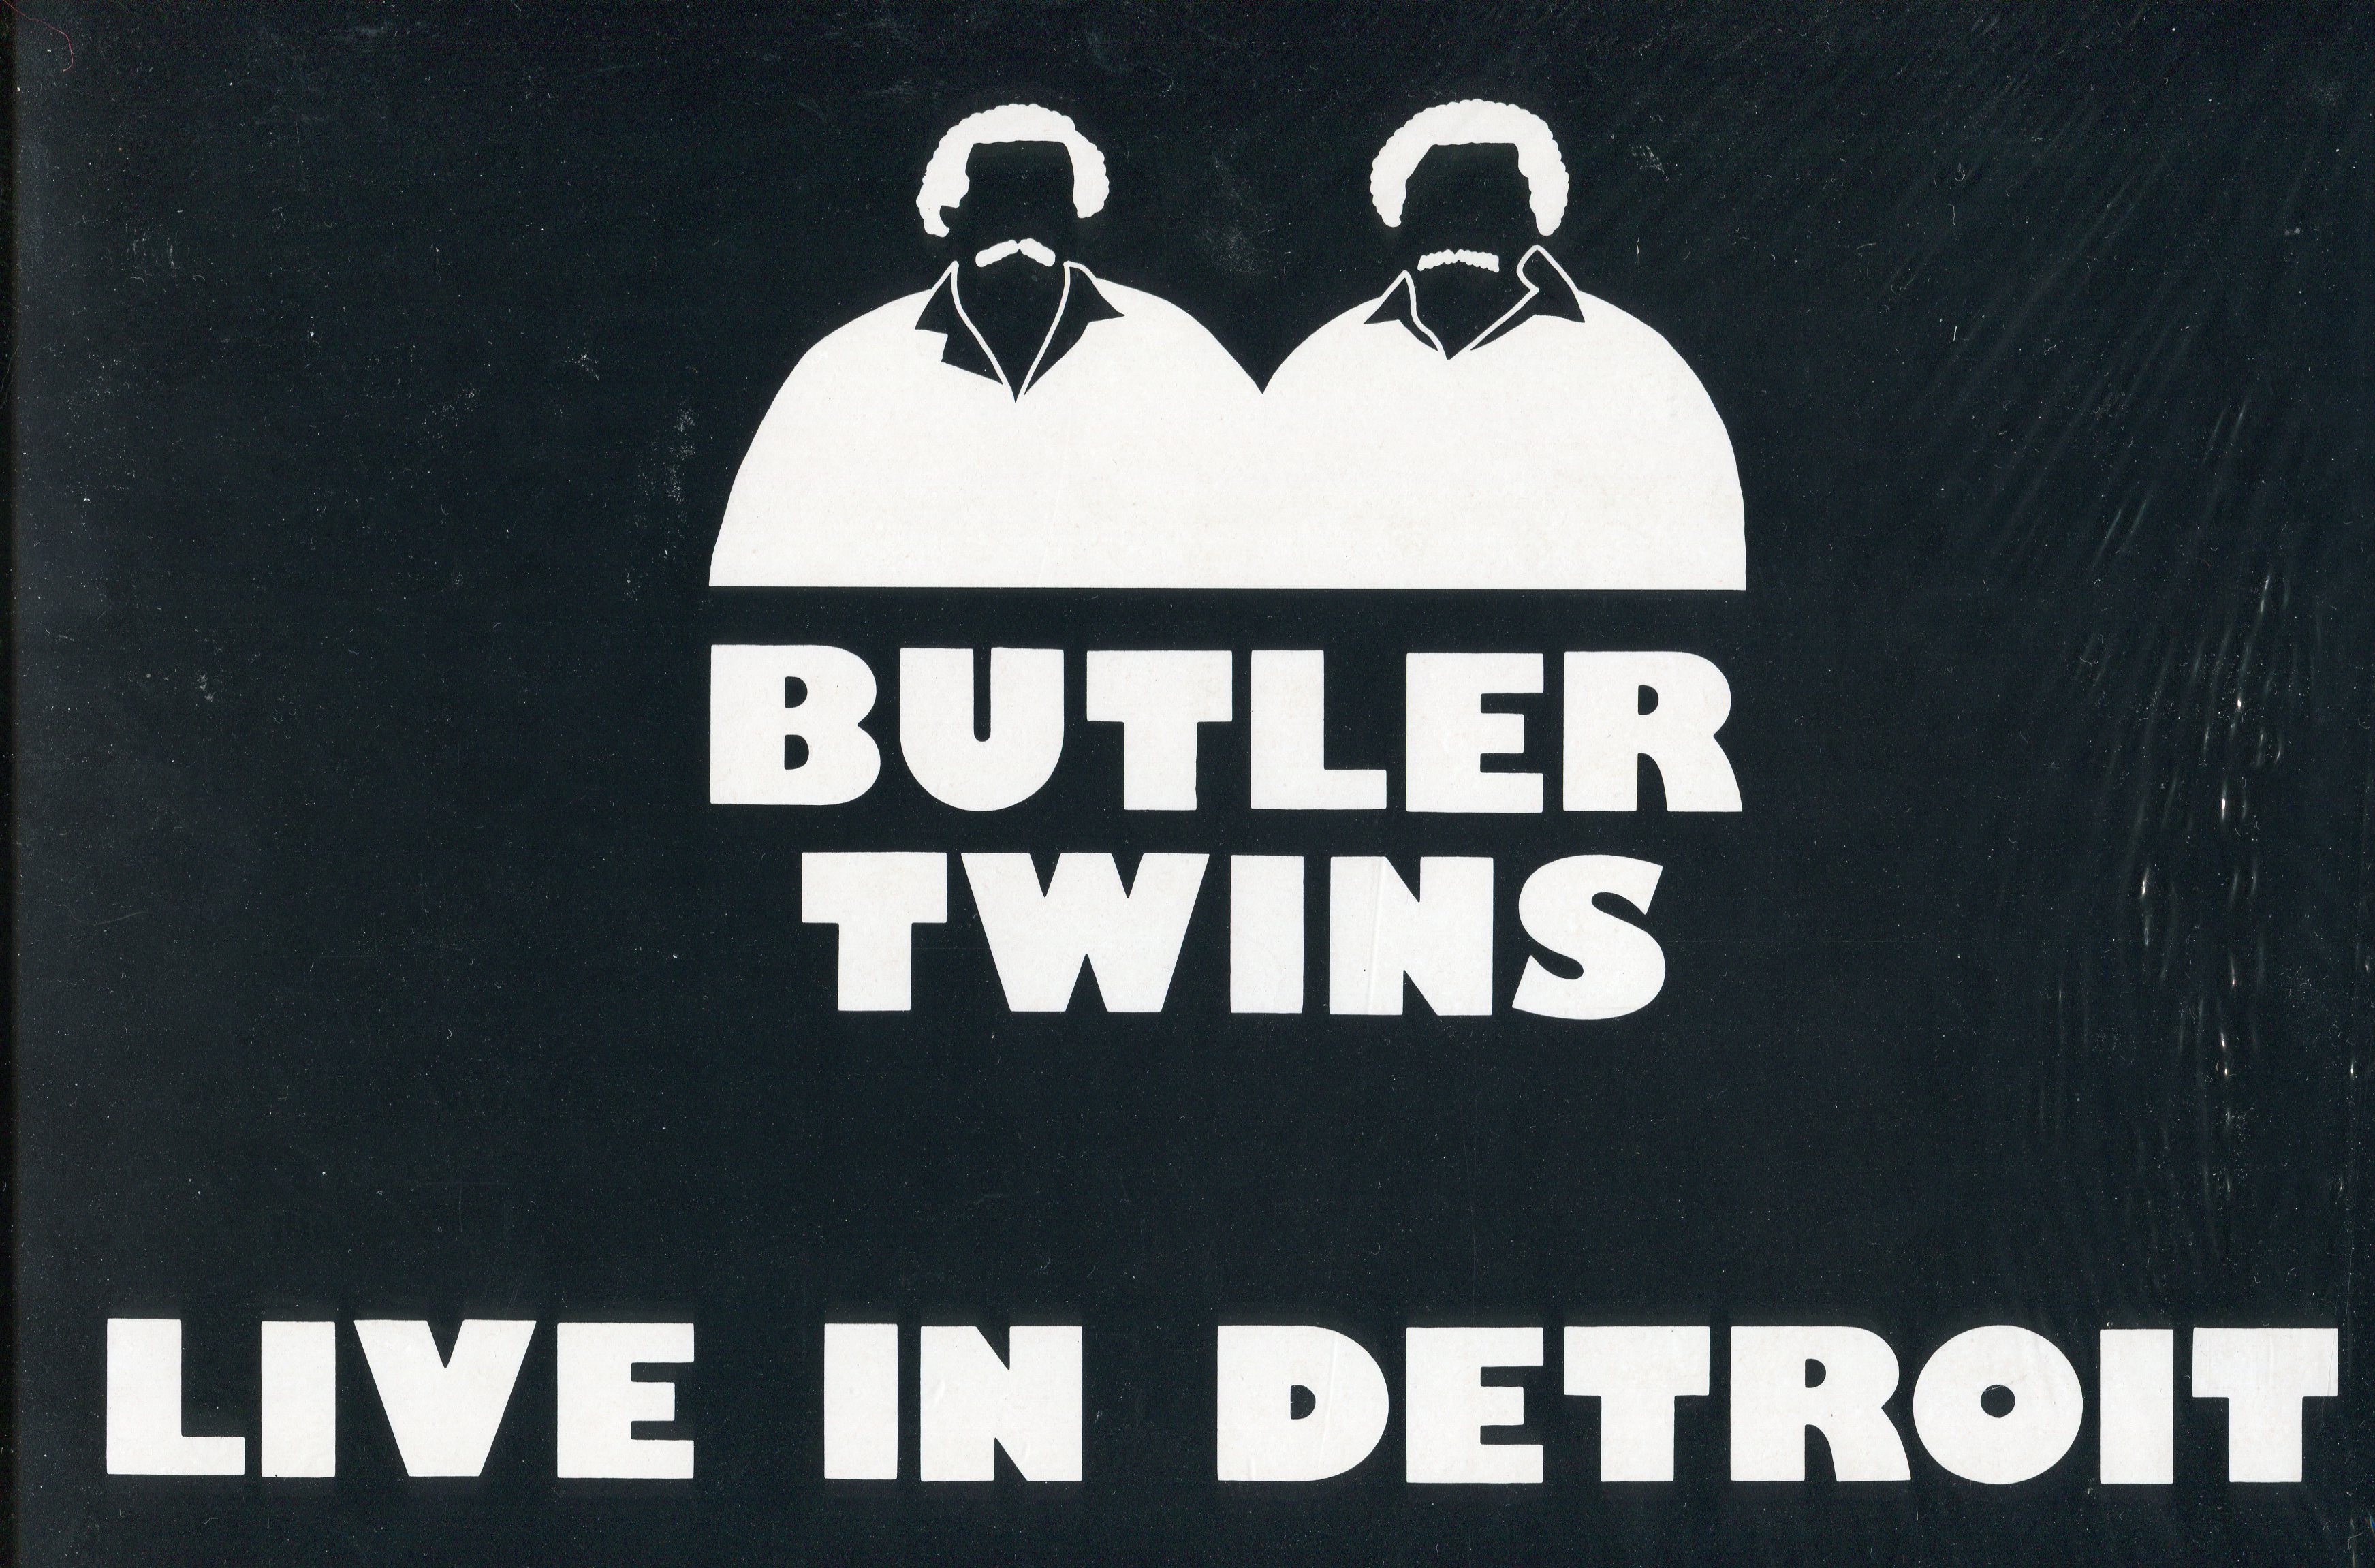 Front Cover of The Butler Twins Album